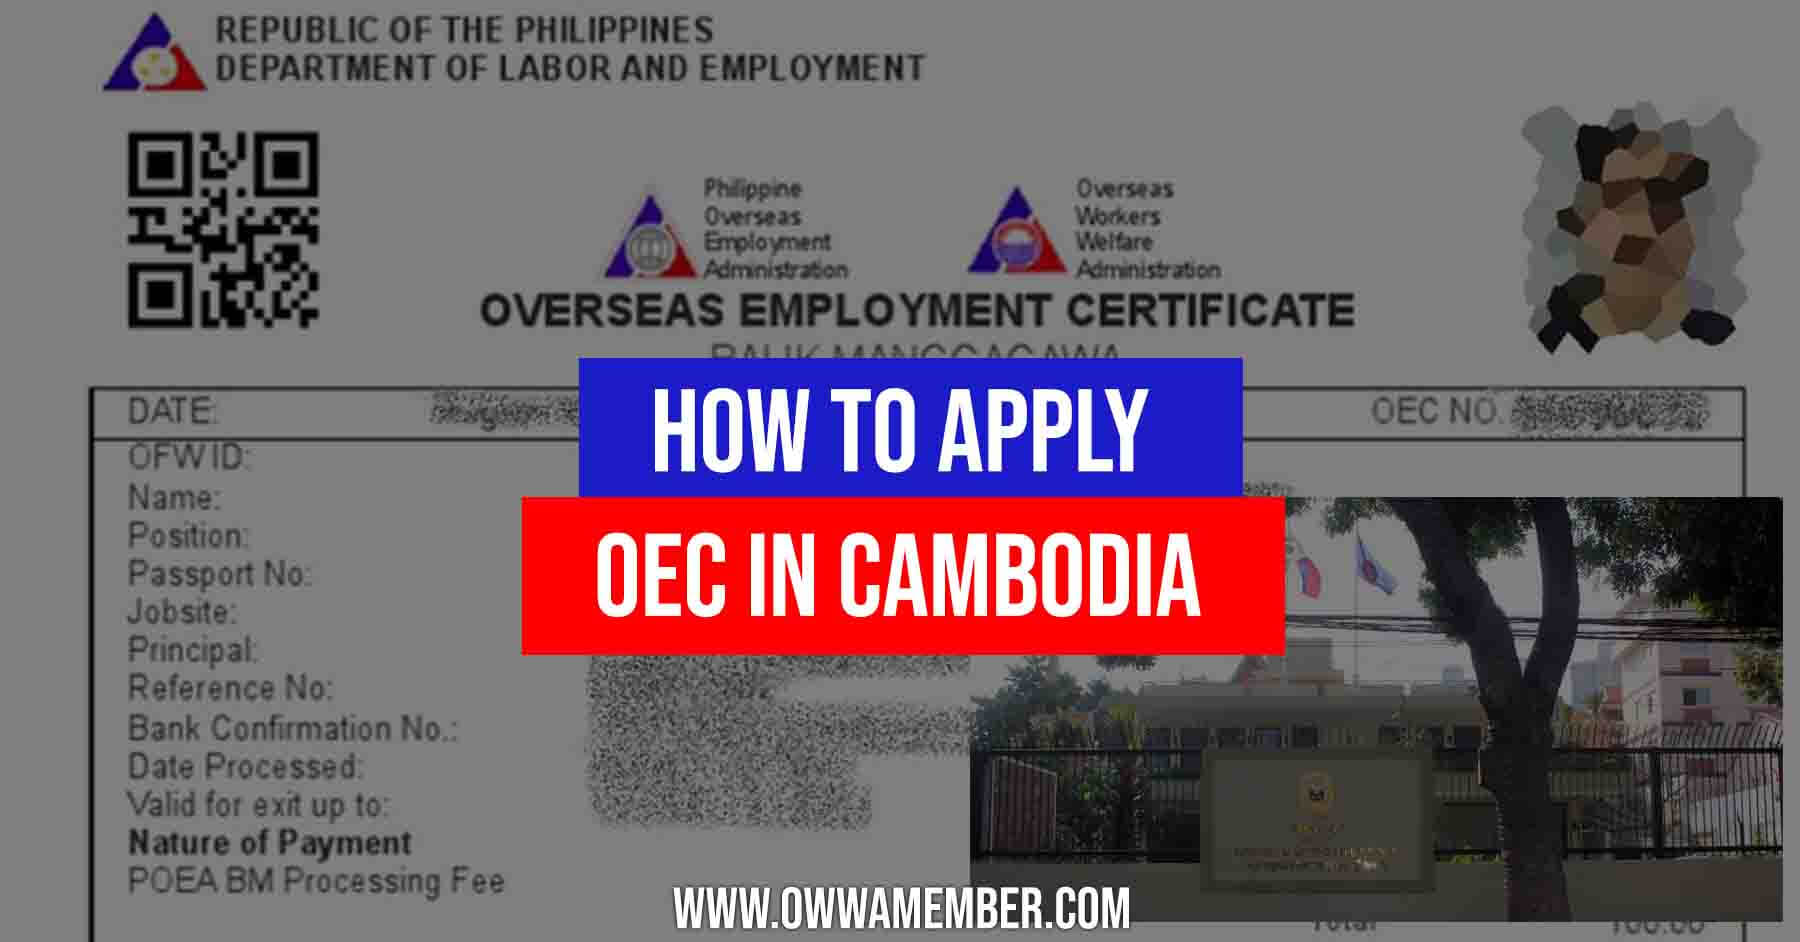 how to apply oec overseas employment certificate cambodia